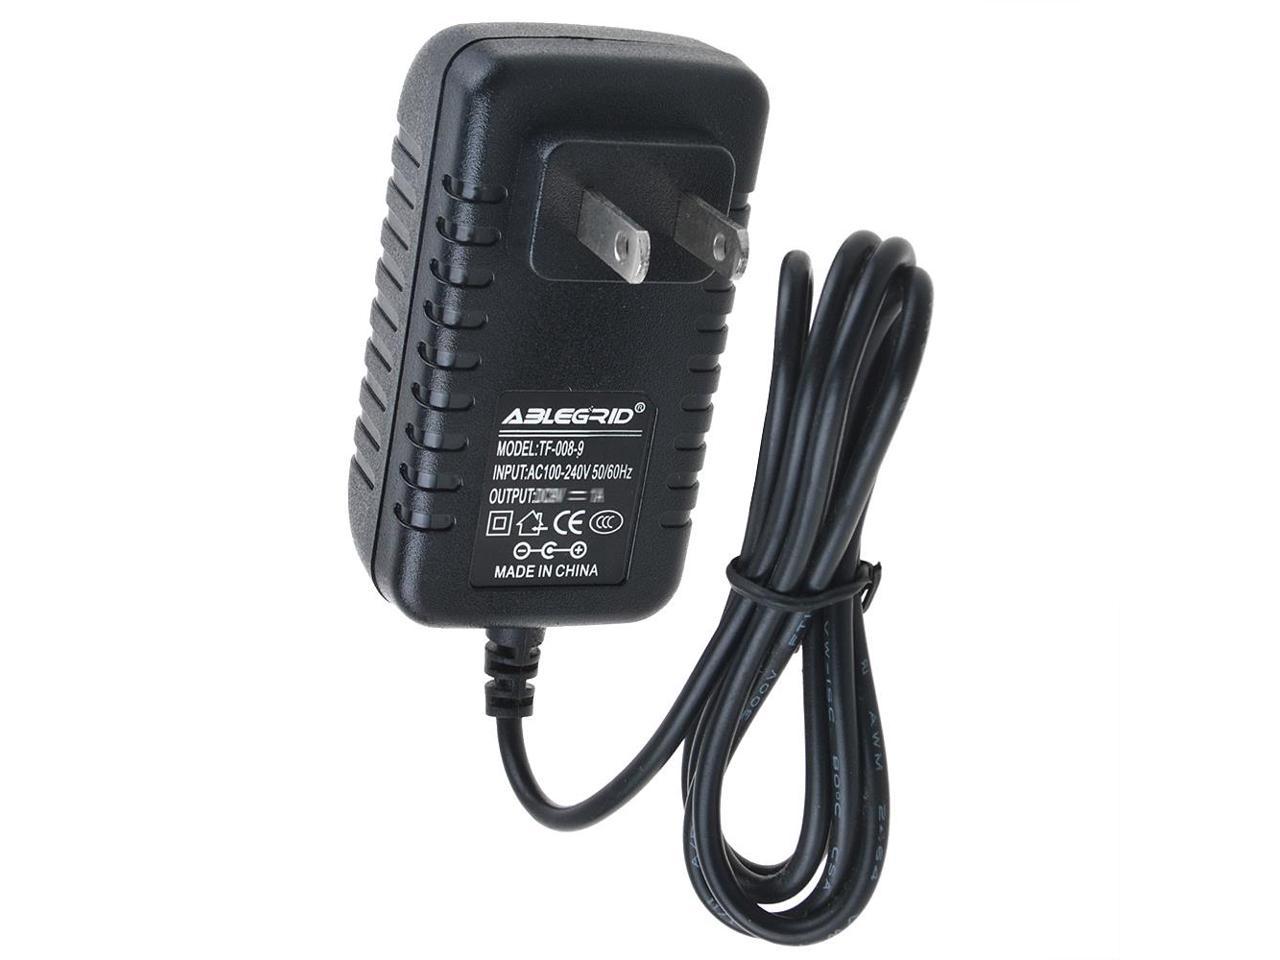 AC Adapter For Levana Astra PTZ Baby Video Monitor 32010 32006 32008 Power Cord 